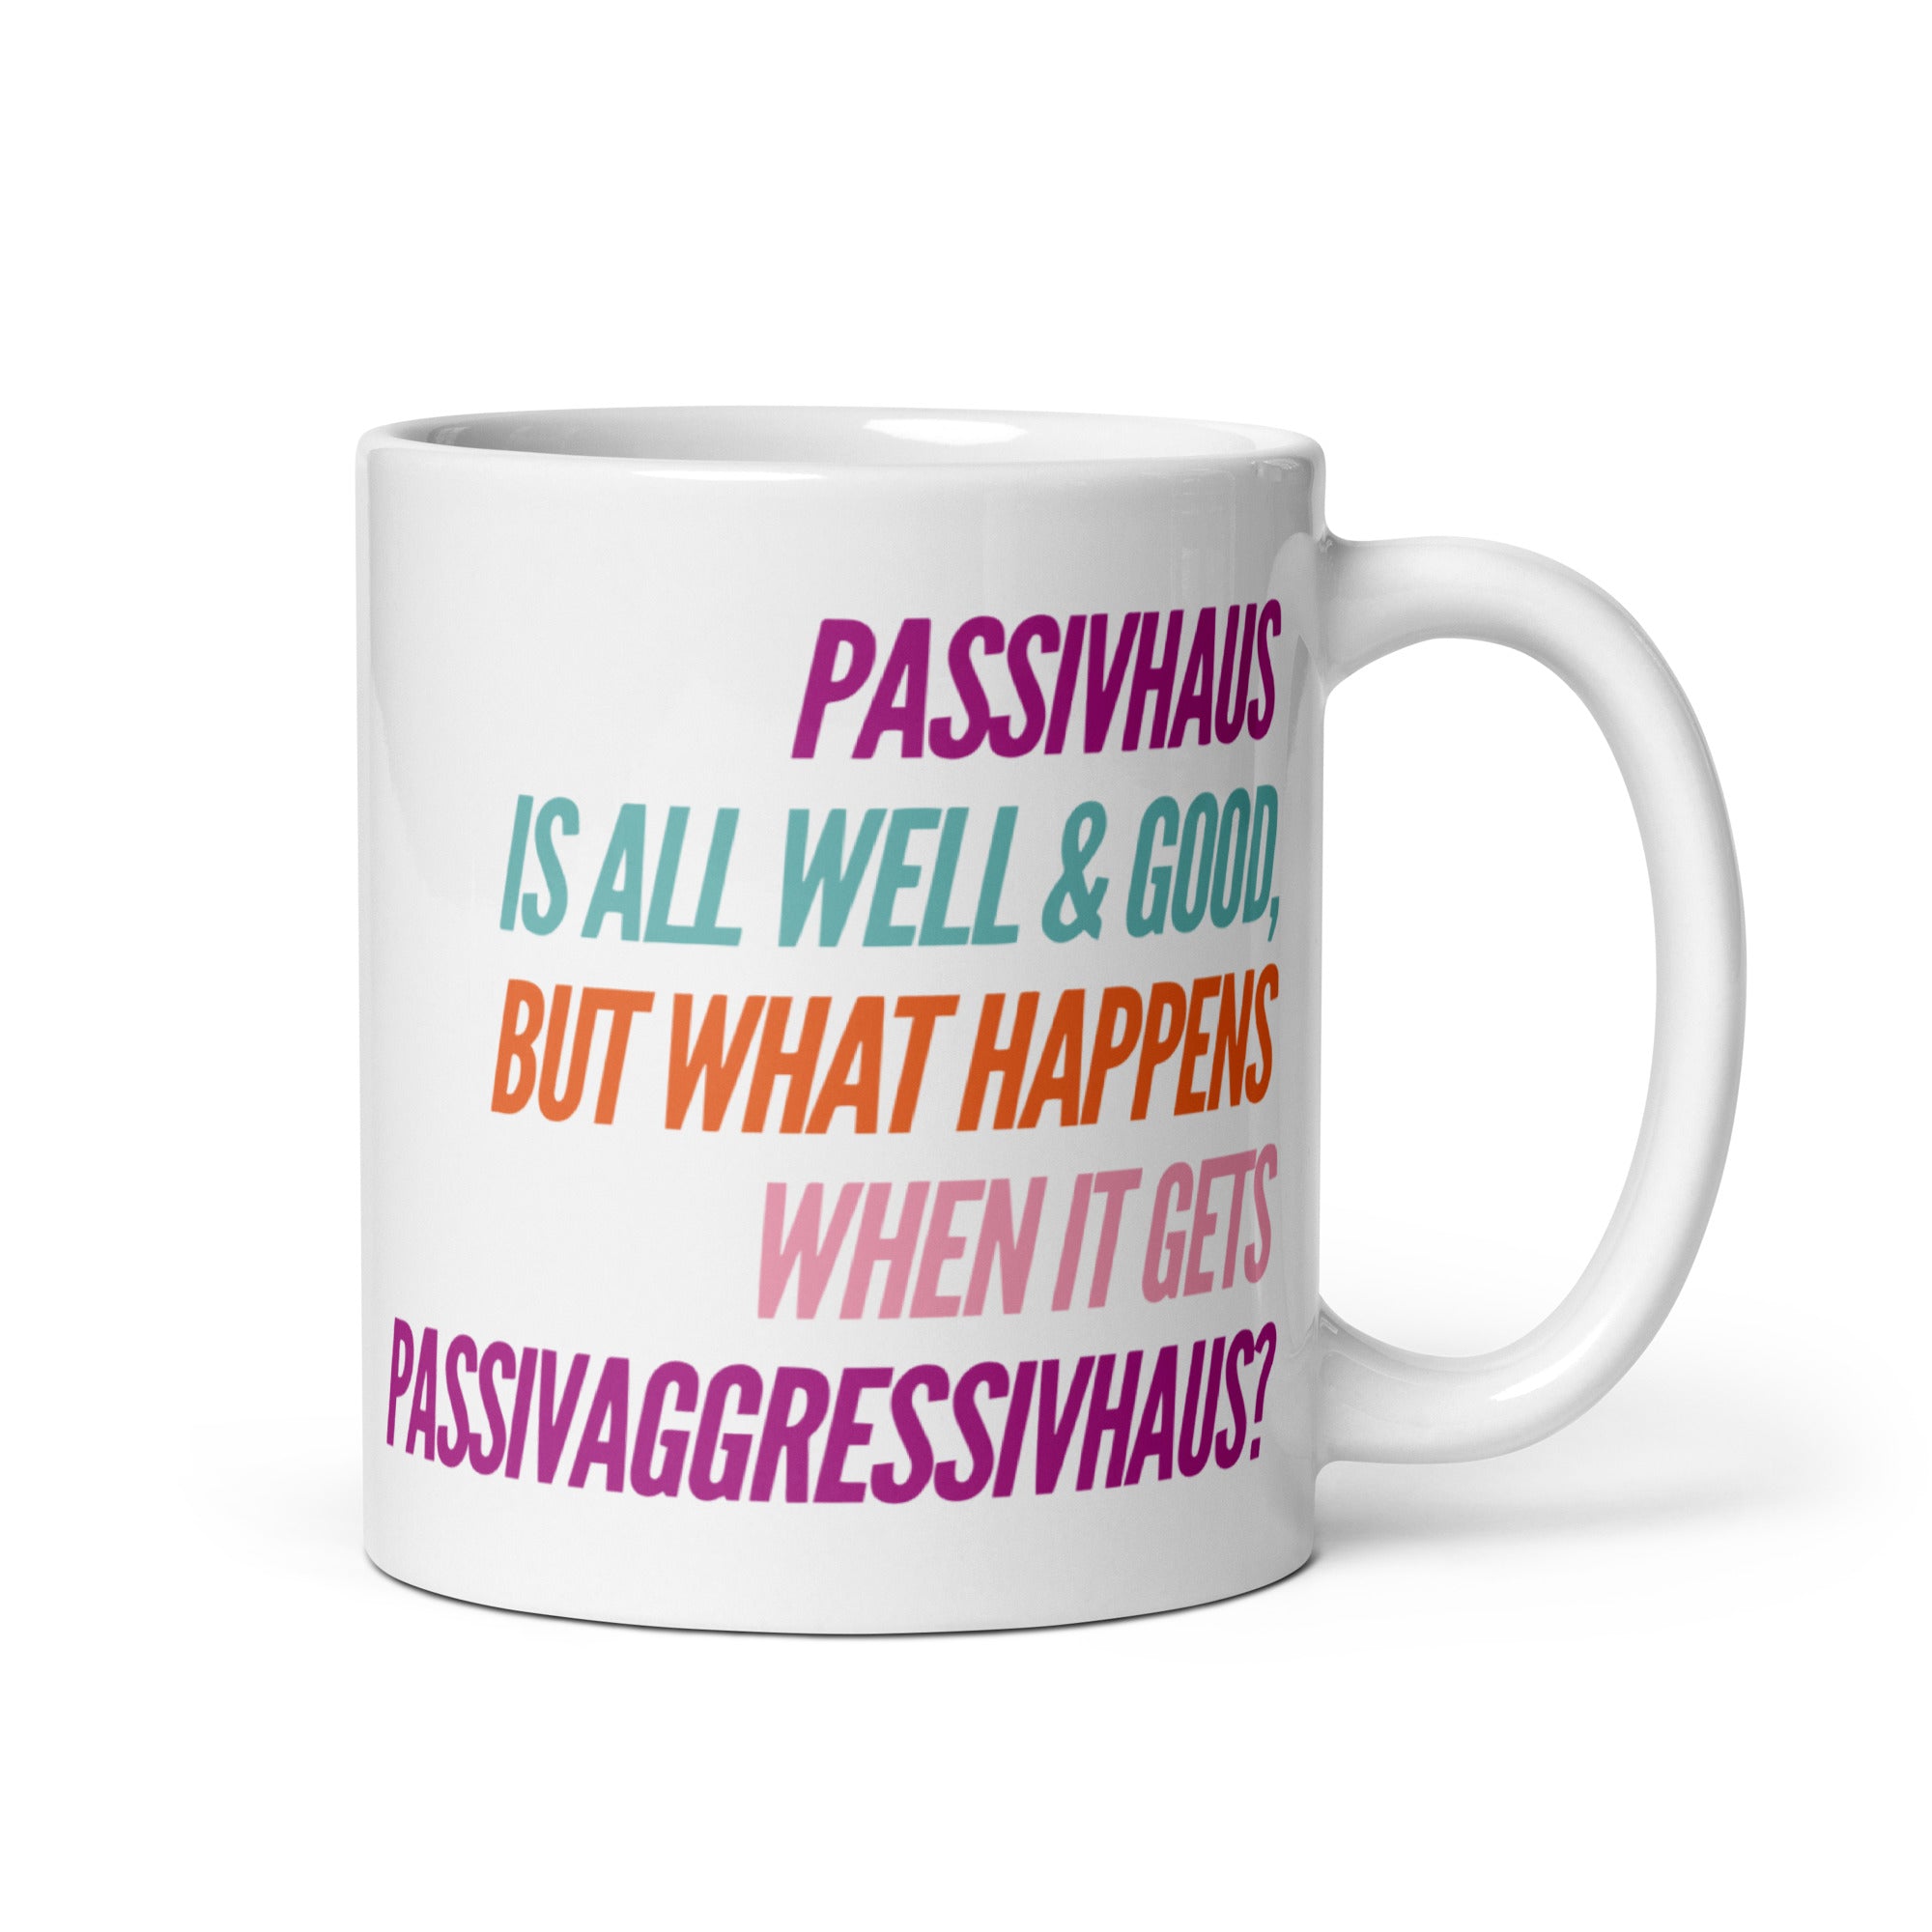 "Passivhaus is all Well and Good, but What Happens When it Gets Passivagrresivhaus?" Mug